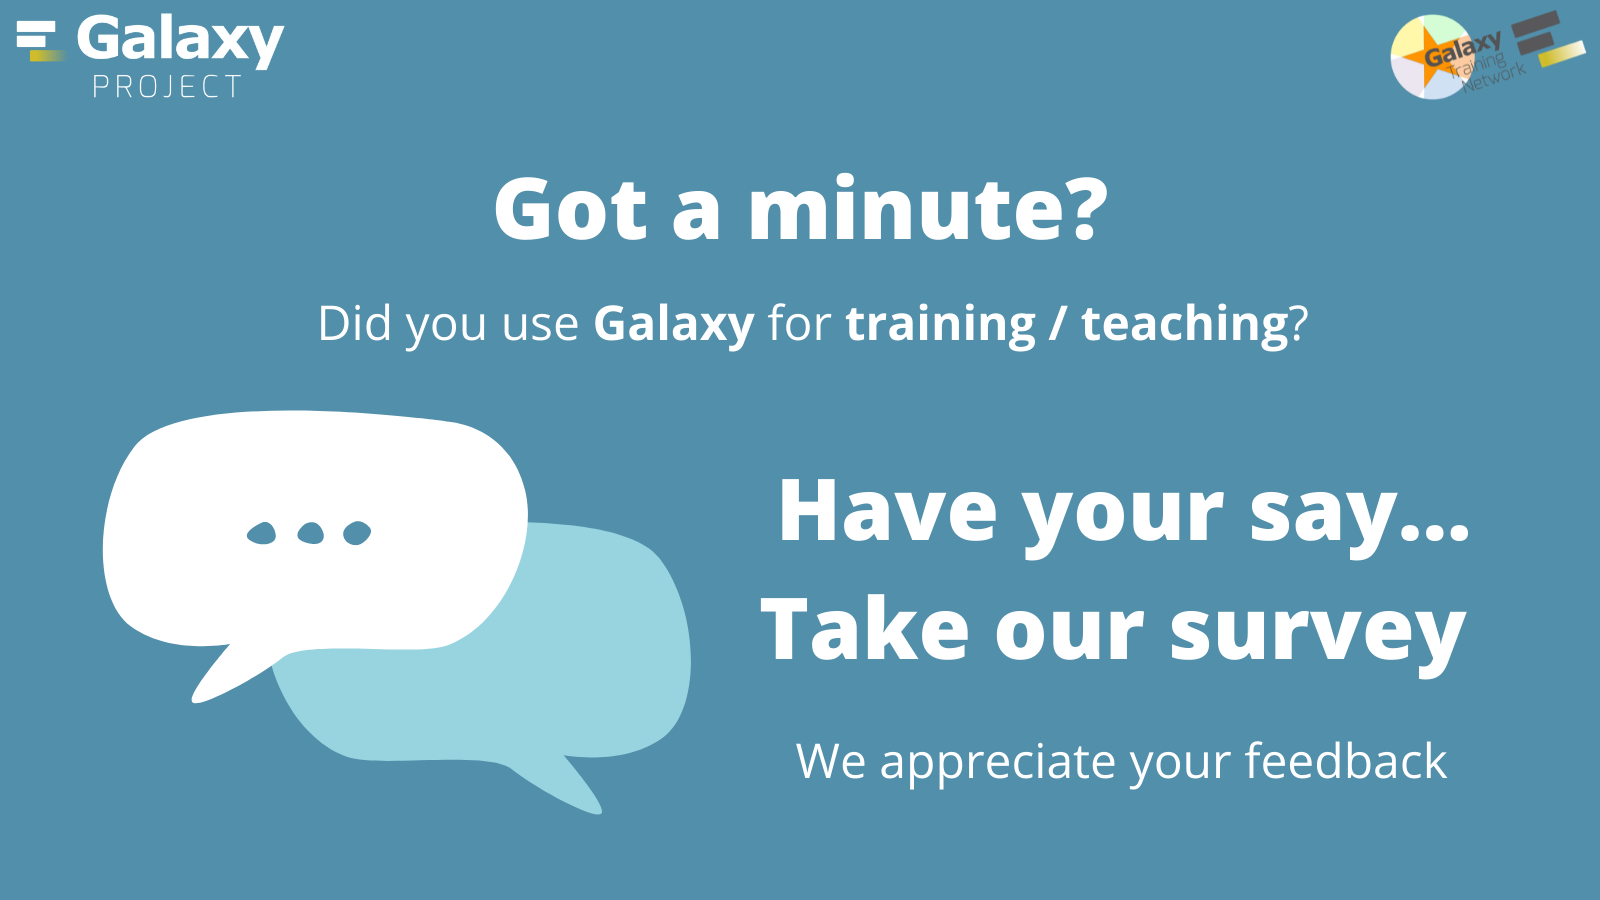 Adversitement for the survey. Written: Got a minute? Did you use Galaxy for training / teaching? Have your say... Take our survey. We appreciate your feedback. Logos: Galaxy Project and Galaxy Training Network